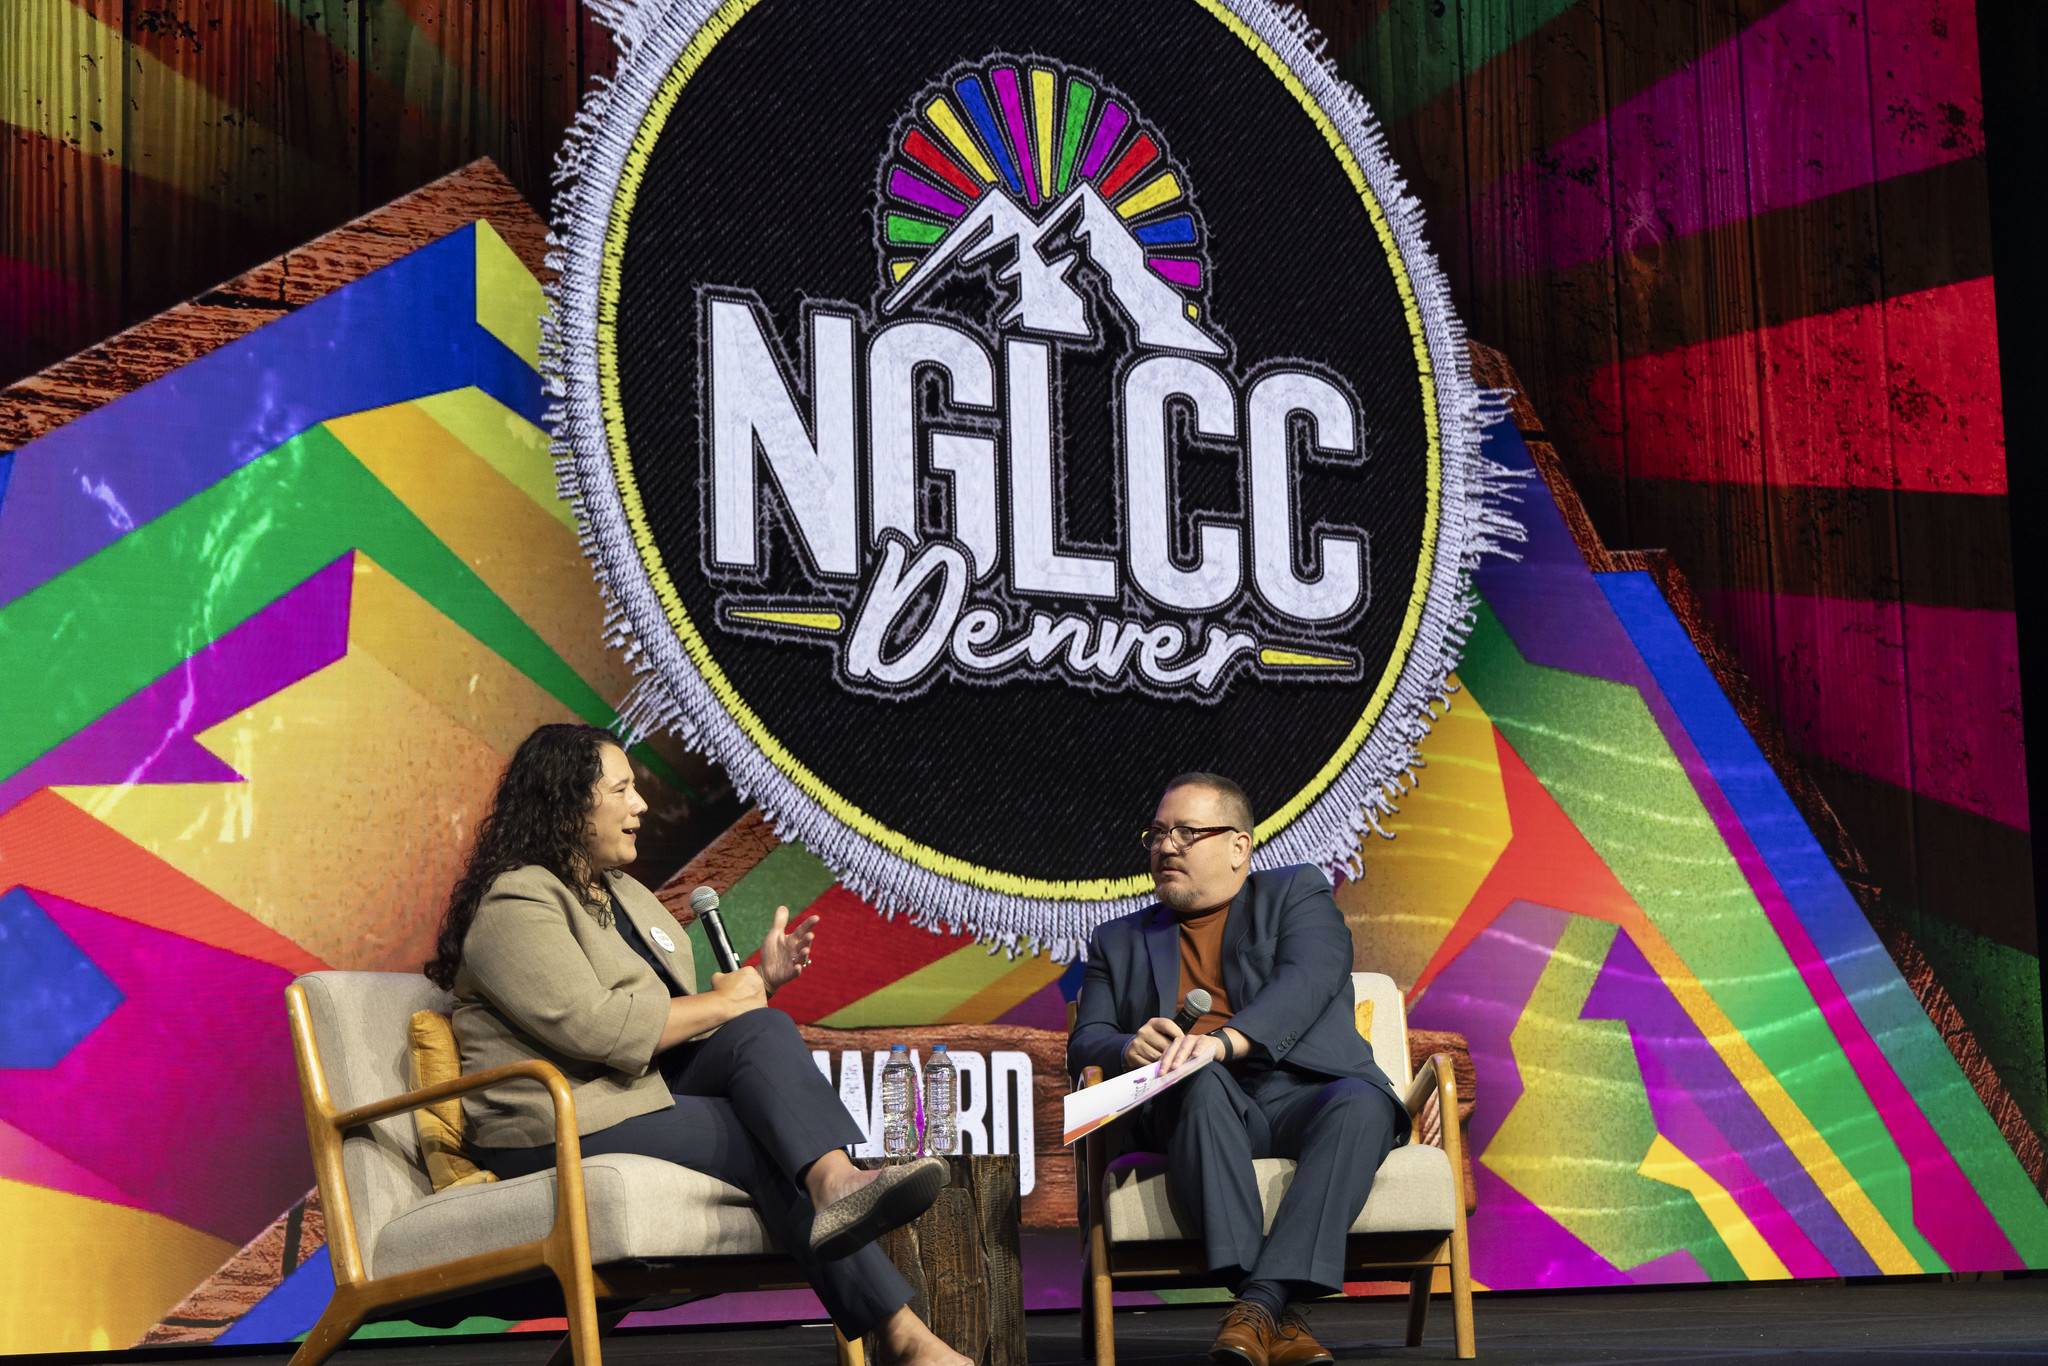 U.S. Small Business Administrator, Isabella Casillas Guzman, being interviewed by NGLCC President and Co-Founder, Justing Nelson.